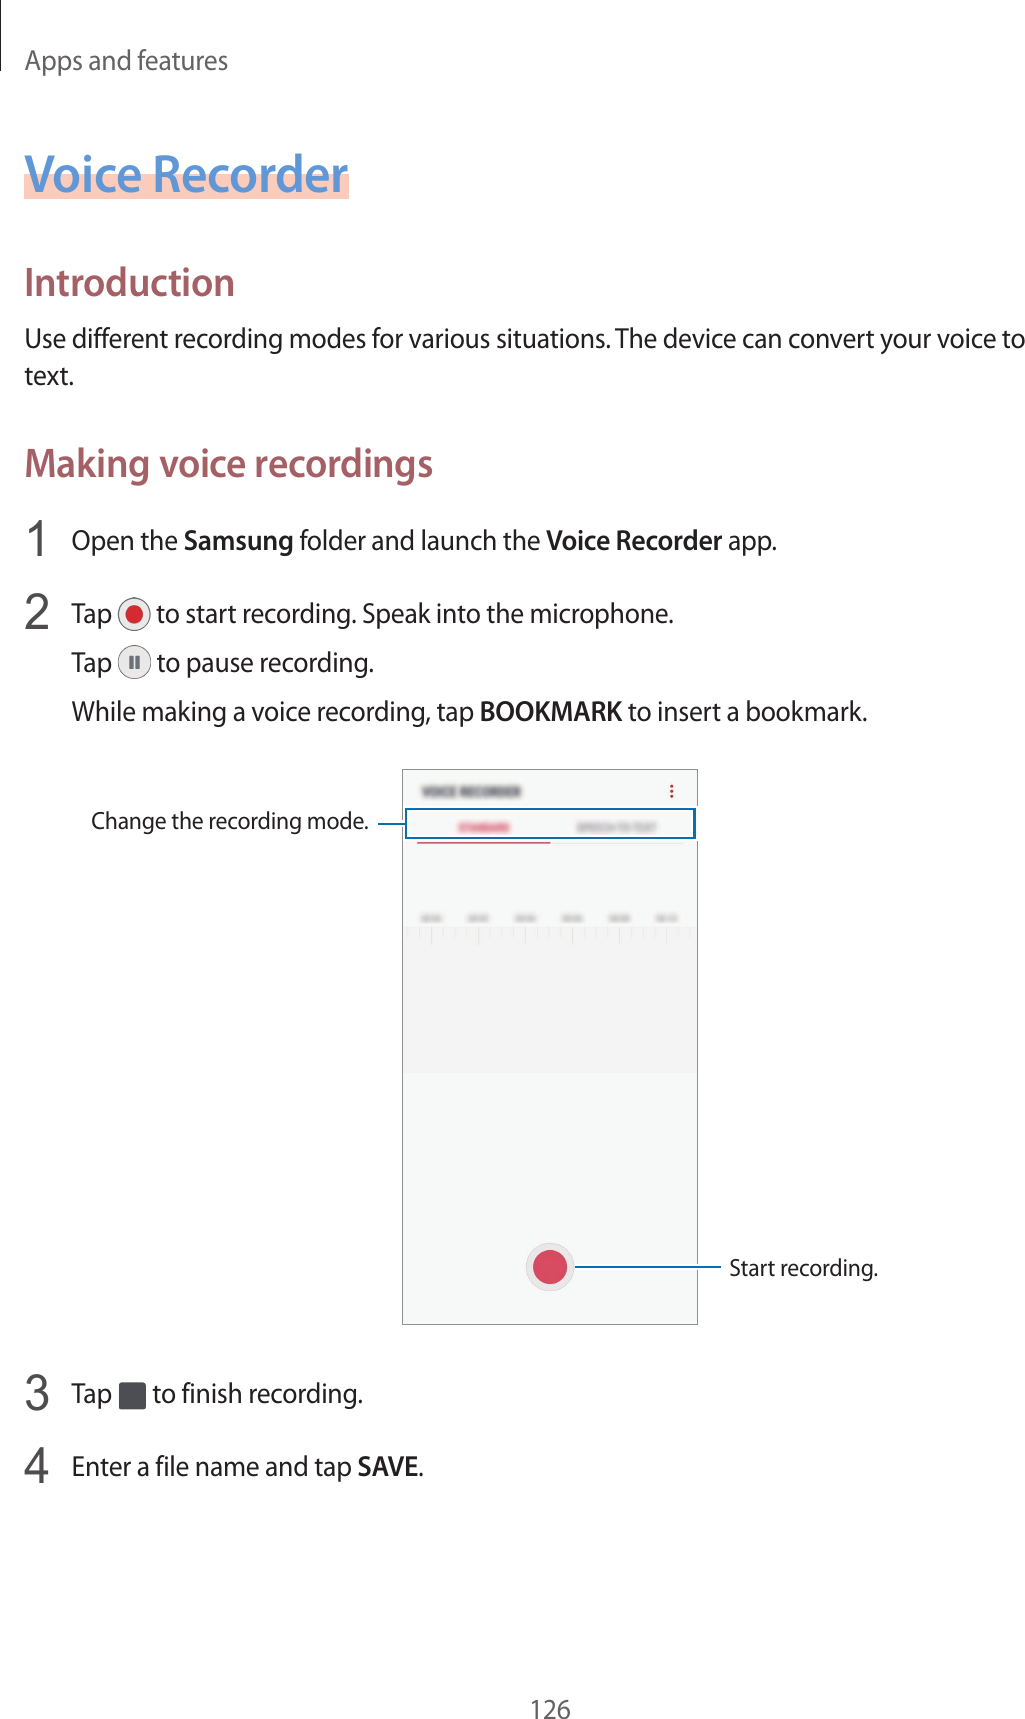 Apps and features126Voice RecorderIntroductionUse different recording modes for various situations. The device can convert your voice to text.Making voice recordings1  Open the Samsung folder and launch the Voice Recorder app.2  Tap   to start recording. Speak into the microphone.Tap   to pause recording.While making a voice recording, tap BOOKMARK to insert a bookmark.Change the recording mode.Start recording.3  Tap   to finish recording.4  Enter a file name and tap SAVE.